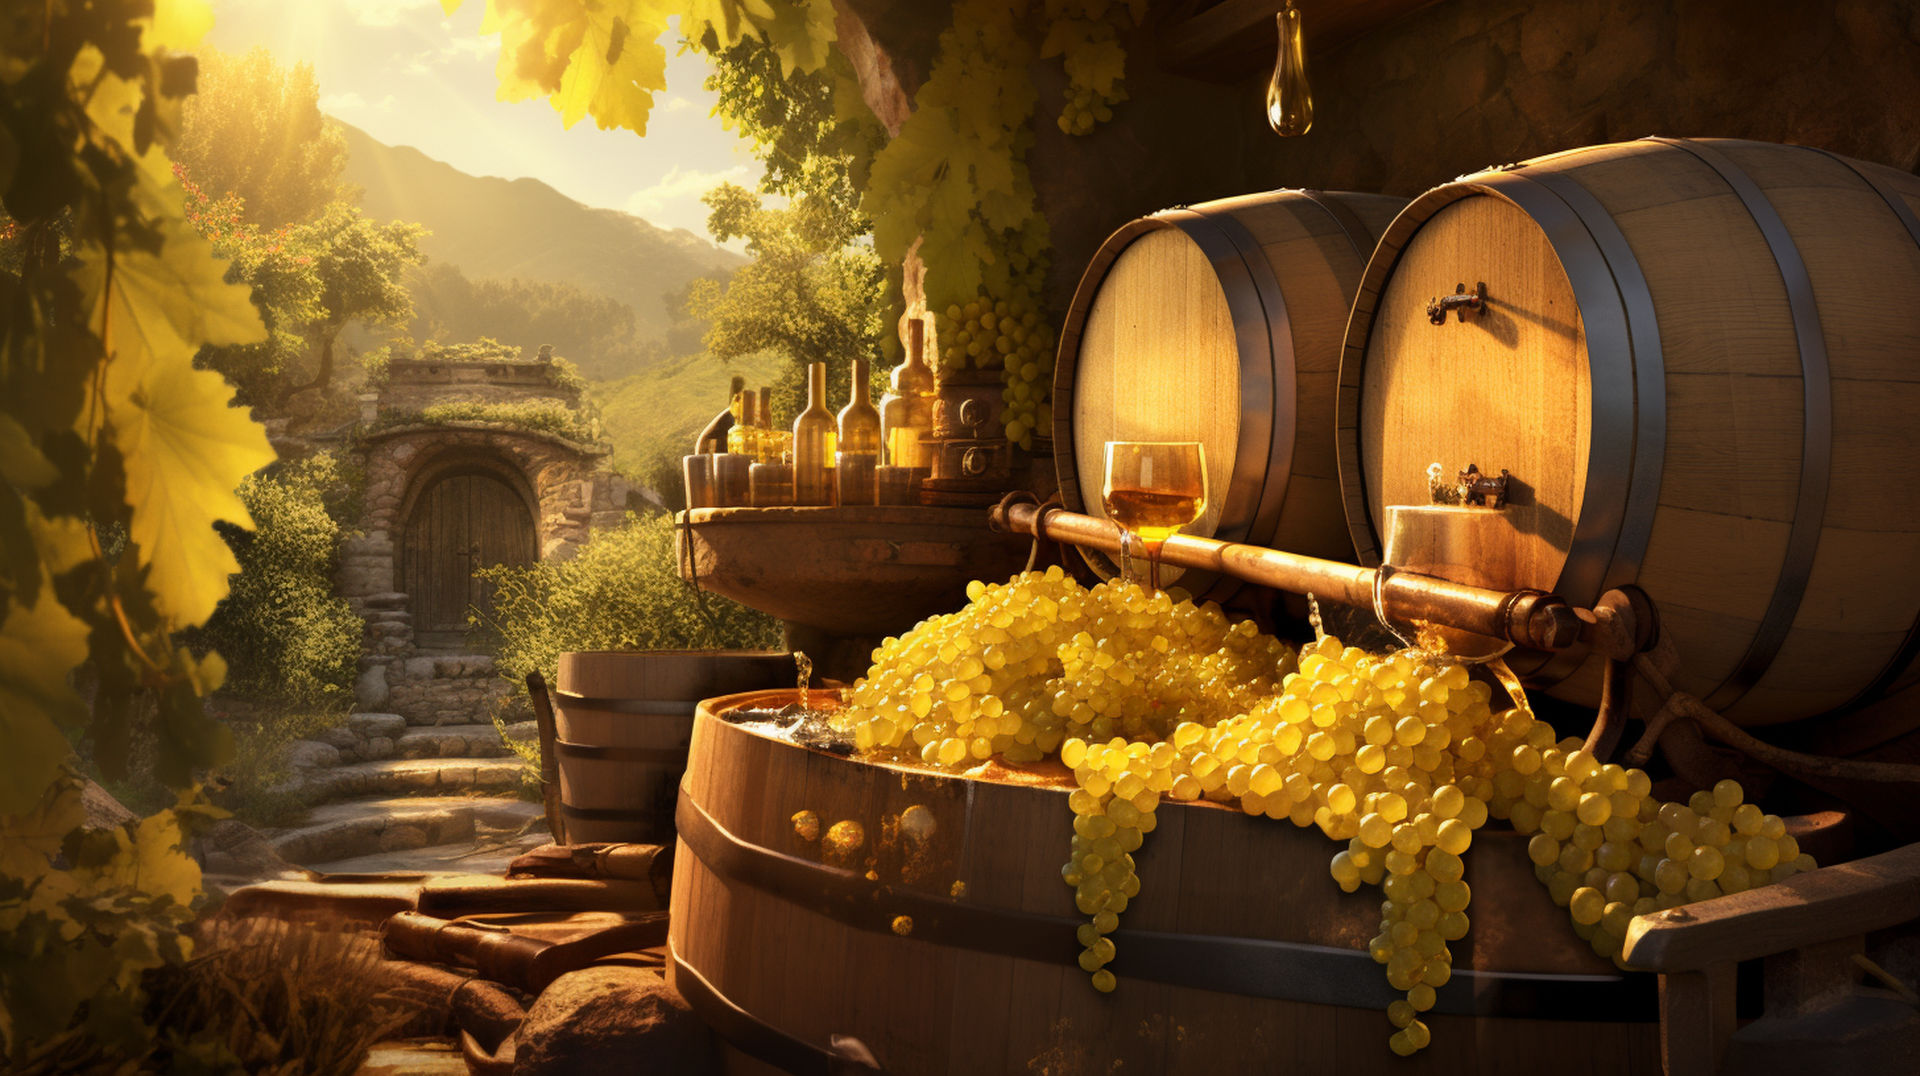 an image showcasing a sunlit vineyard with Chardonnay grapes, a wine press, oak barrels, and a glass of golden Chardonnay, capturing the process of winemaking.